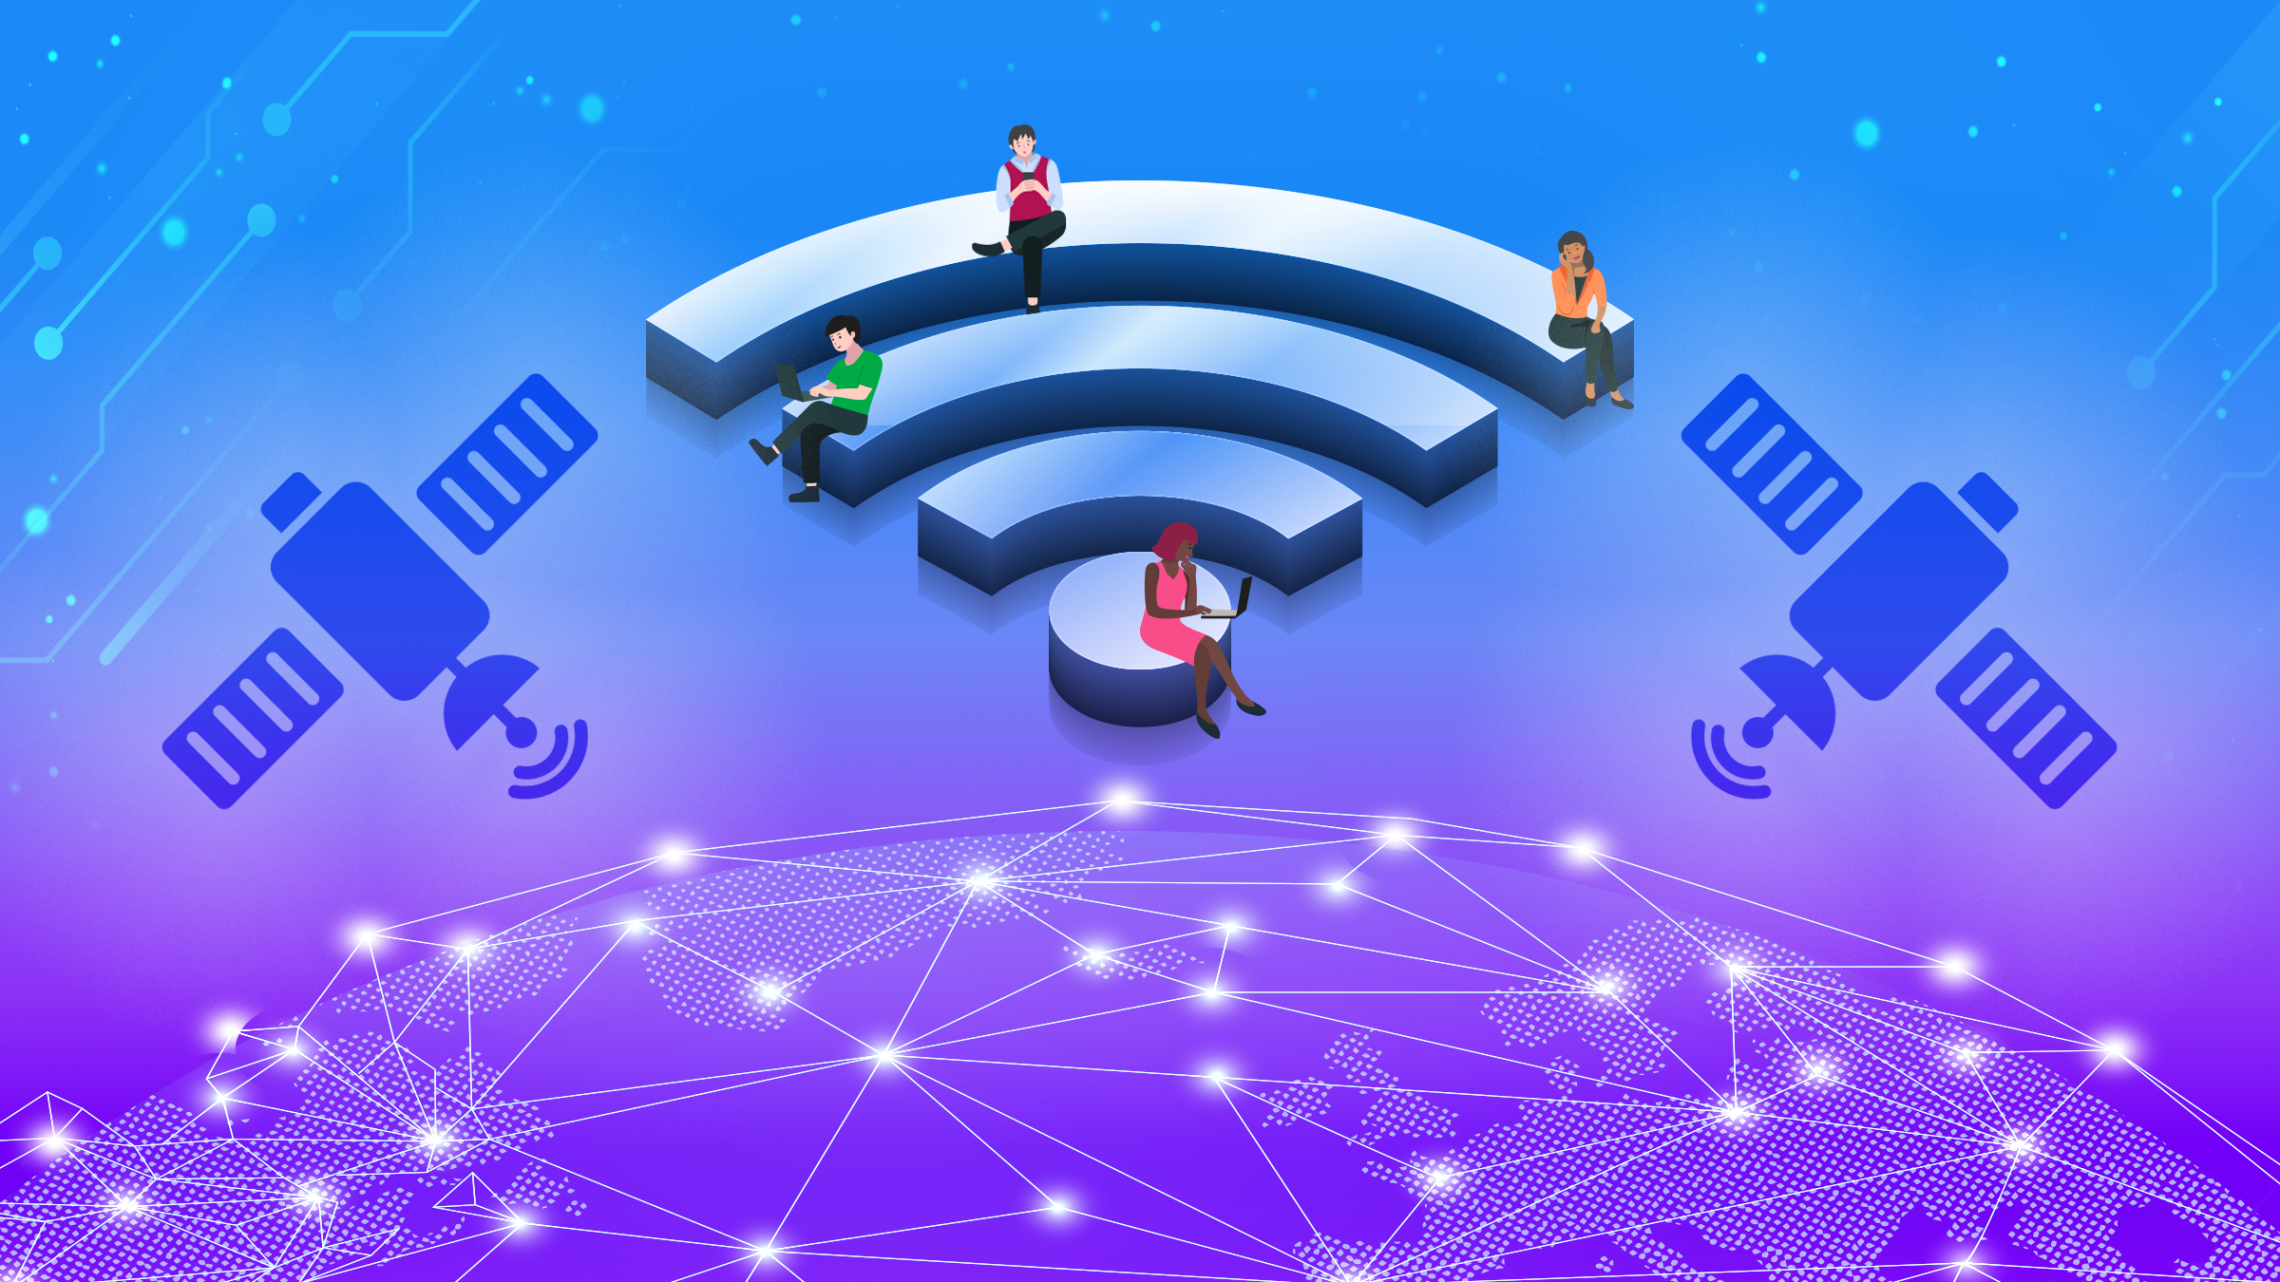 Get Lightning-Fast Satellite Internet For Your Business And Leave Slow Connections Behind!